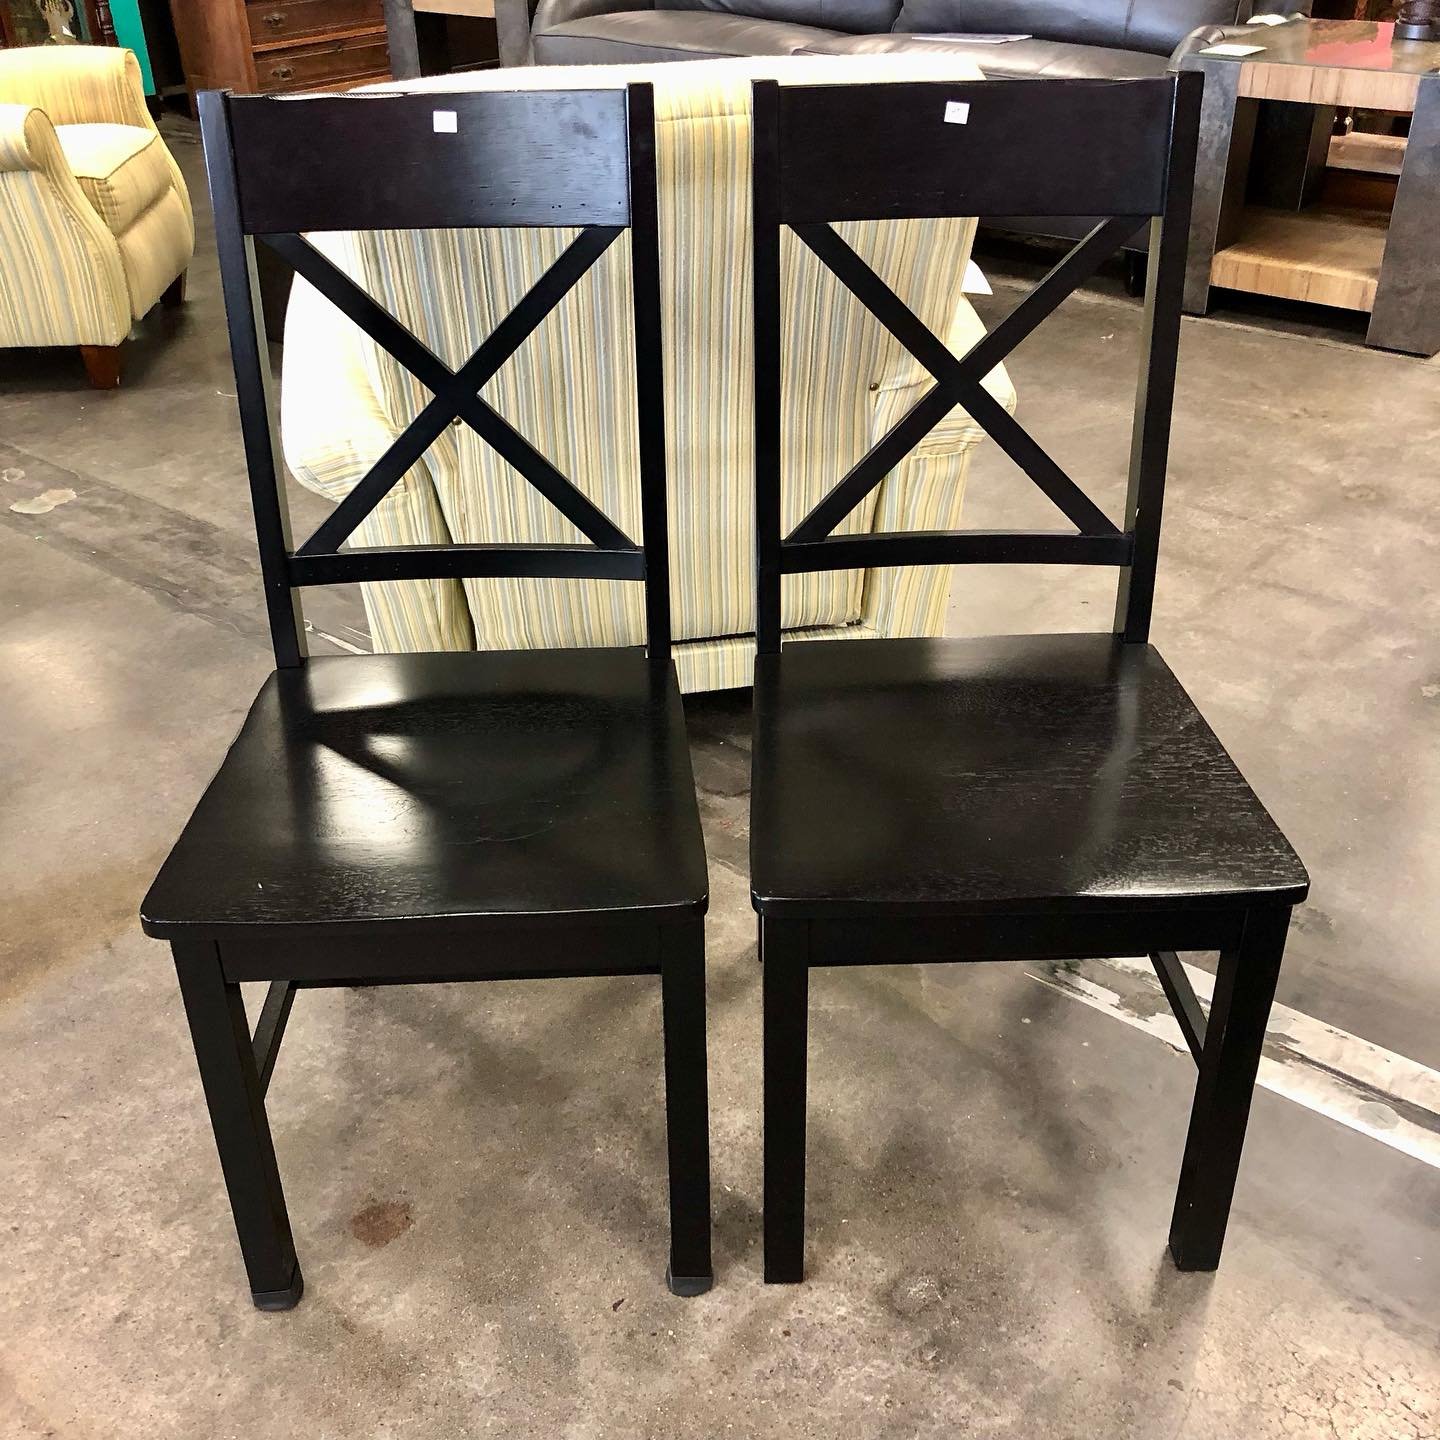 We&rsquo;ve got that extra chair you need! Come see us! We&rsquo;re open 10am-6pm at 1407 Sherwood Ave. RVA 23220 (804) 353-8890. DiversityThrift.org
#chairs #furniture
#thriftstorefinds #thrifting